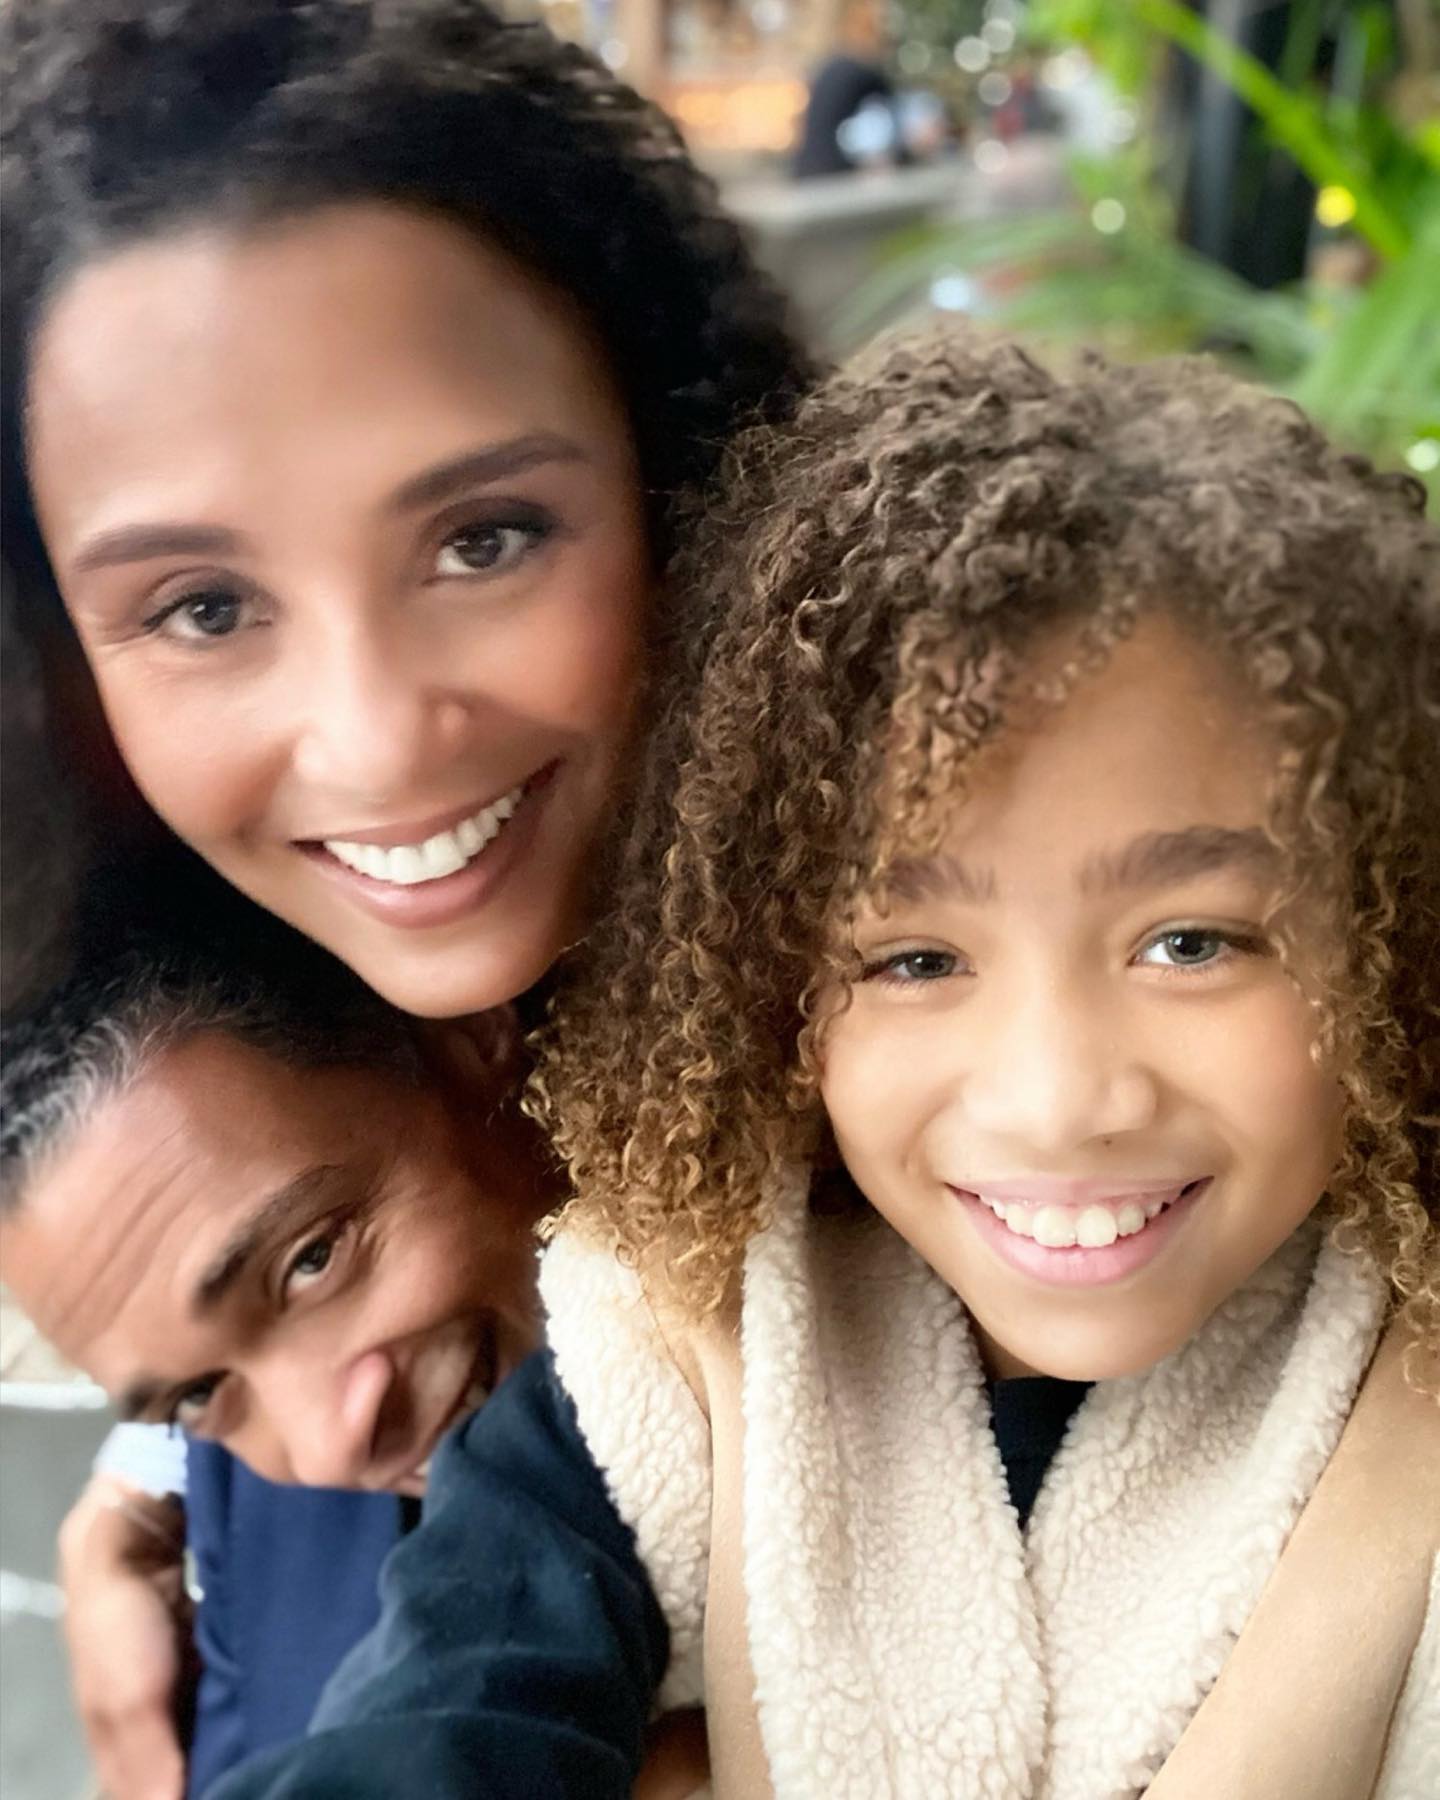 Marilee is the mother of TJ's 10-year-old daughter Sabine